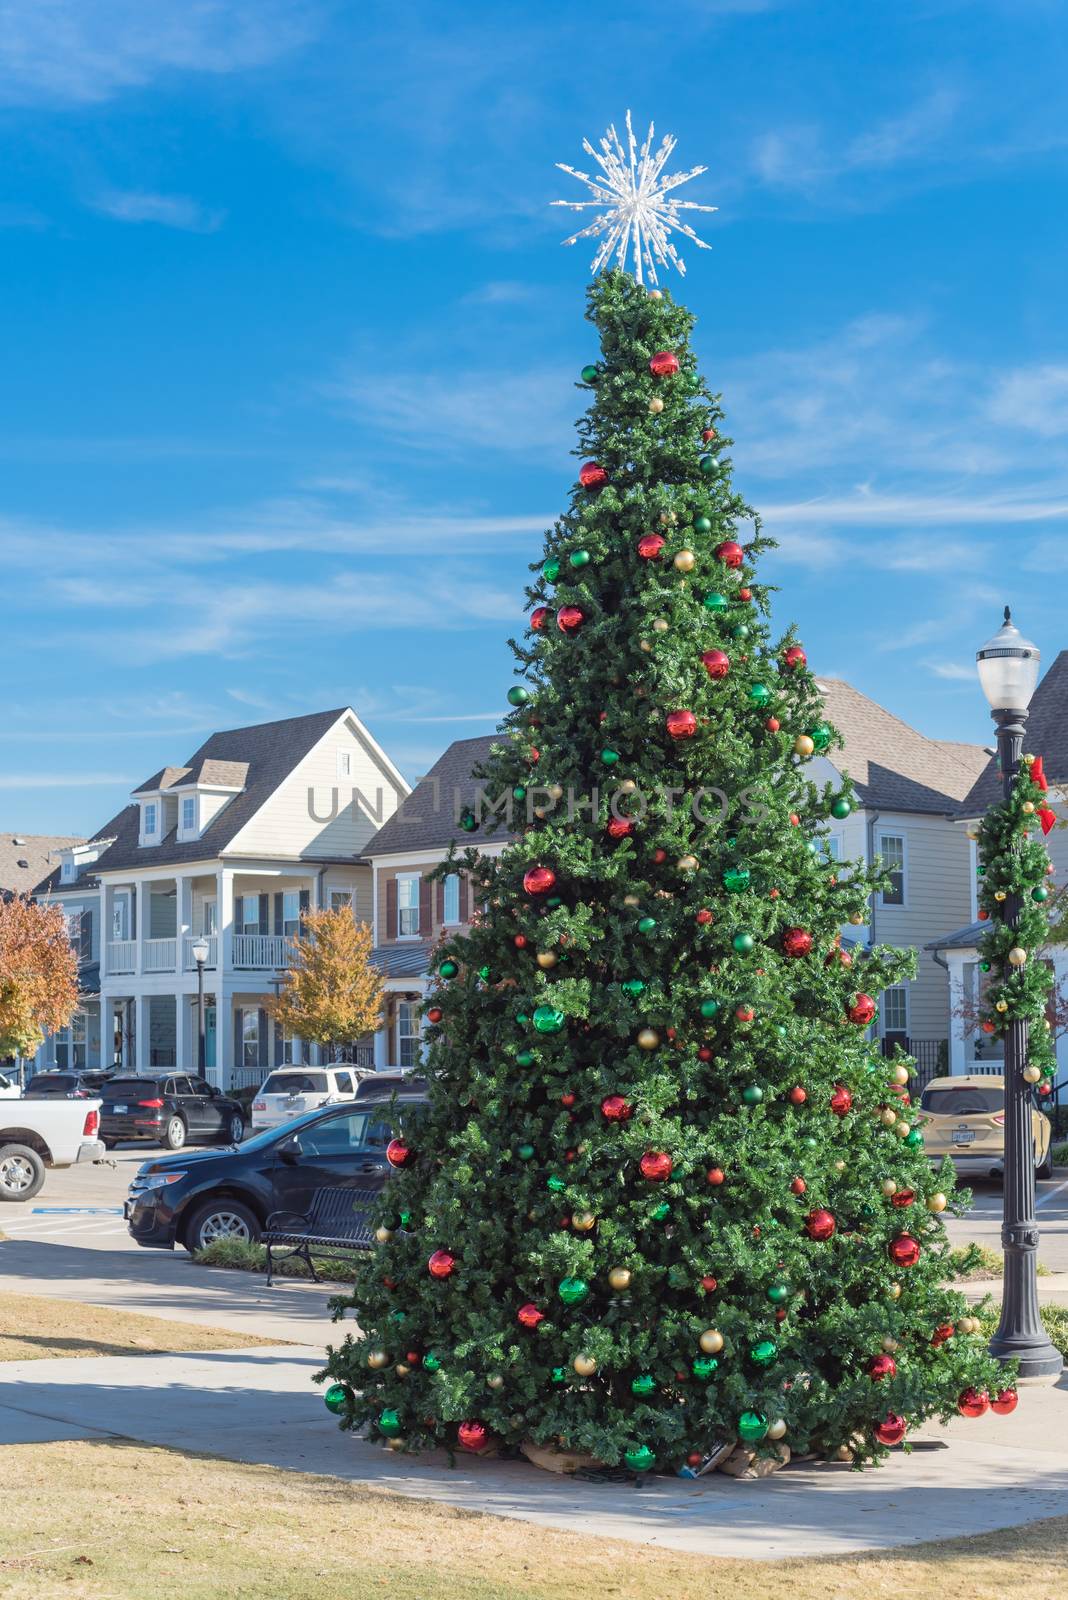 Giant Christmas tree with snowflake tree topper and colorful glass ornaments ball on display at City Square park in Coppell, Texas, USA. Xmas decoration with parked cars and country-style houses